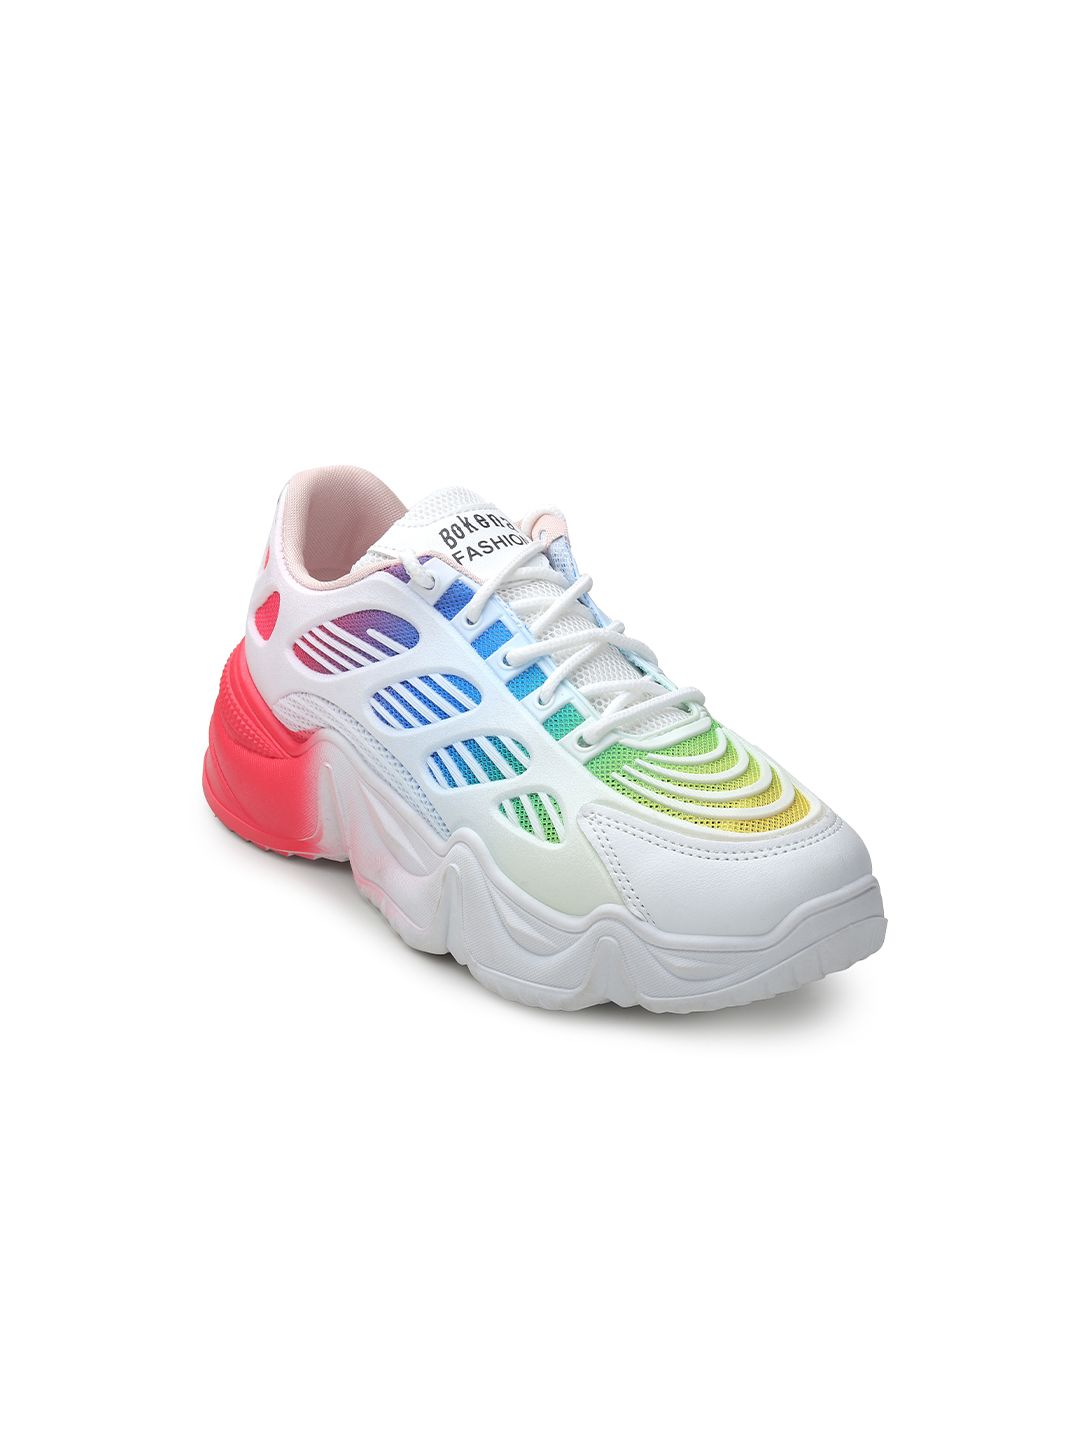 CASSIEY Women Pink Mesh Walking Shoes Price in India